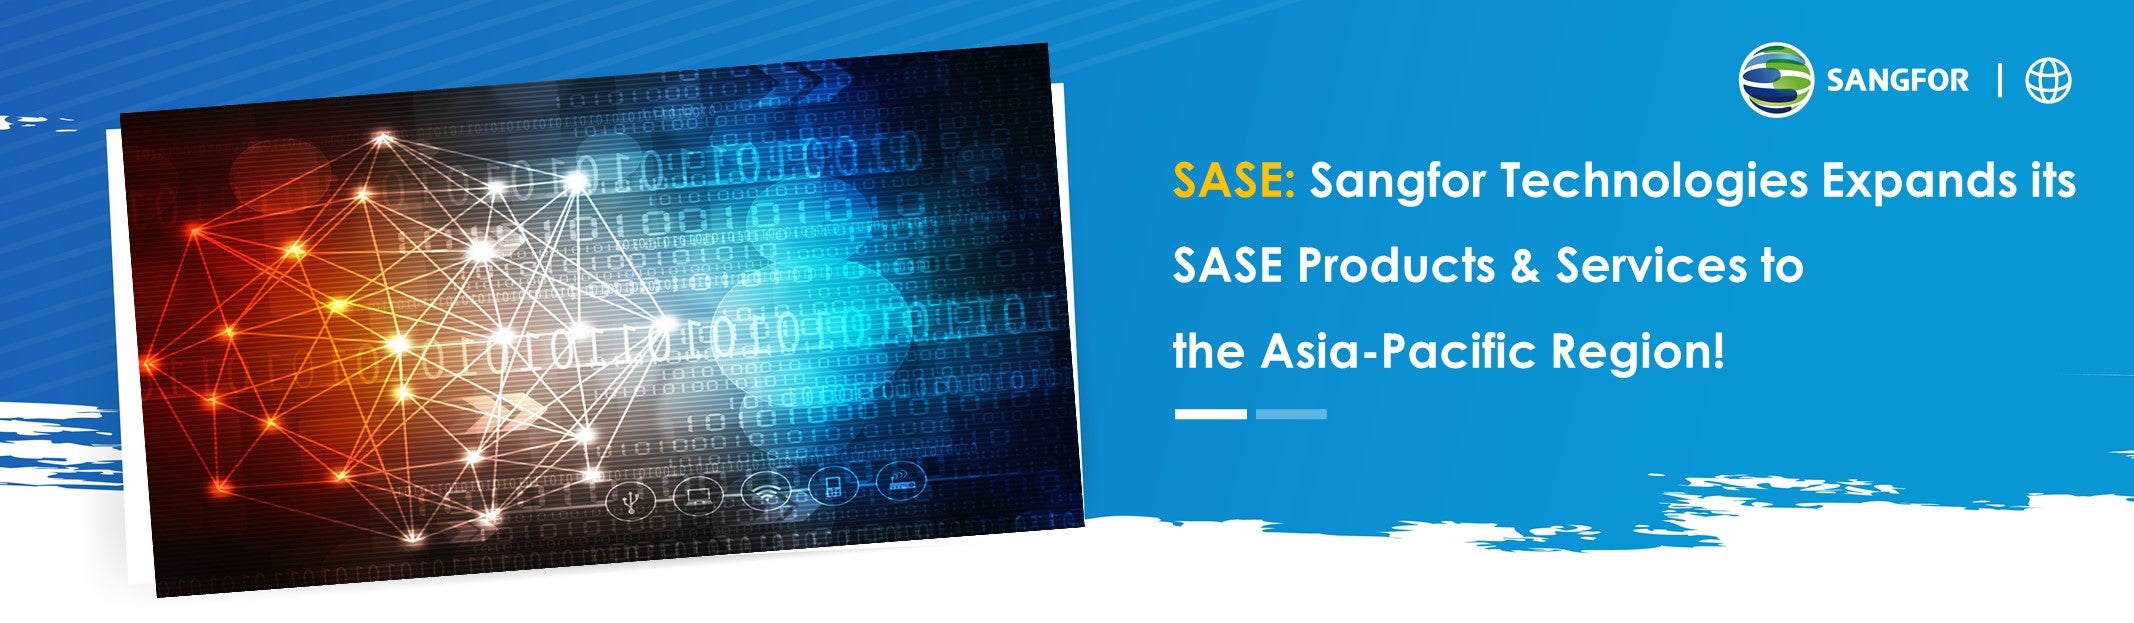 Sangfor Technologies Expands Its SASE to the Asia Pacific Region